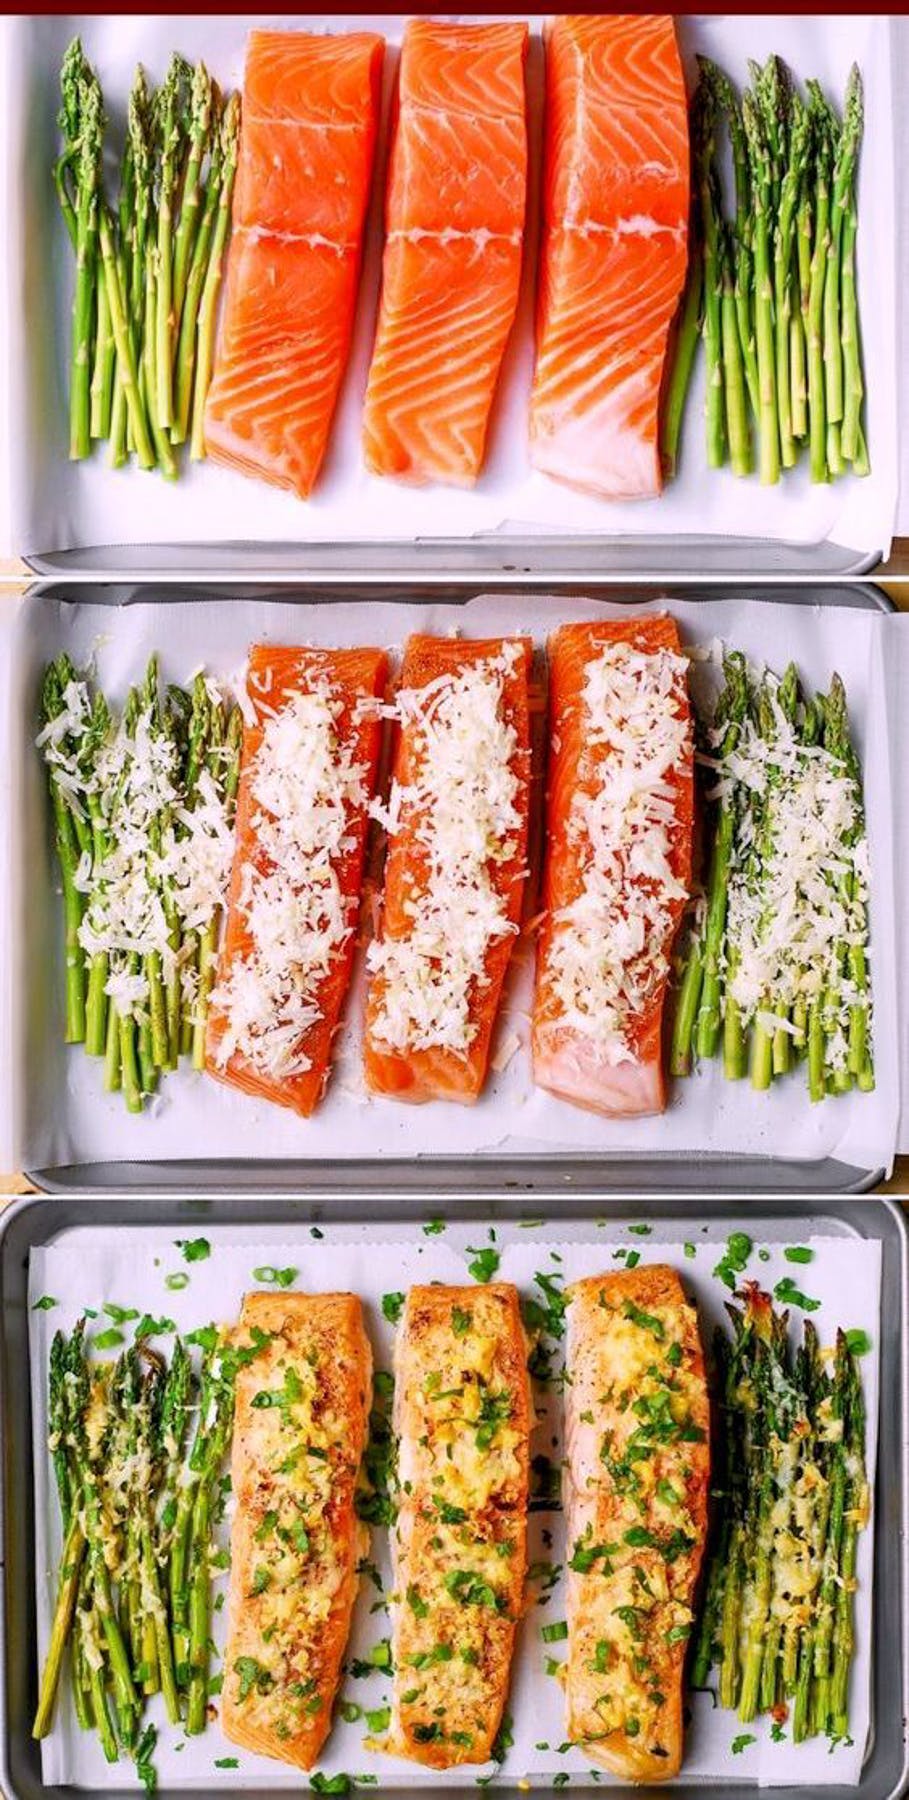 Garlic Parmesan Crusted Baked Salmon and Asparagus (collage of 3 photos)